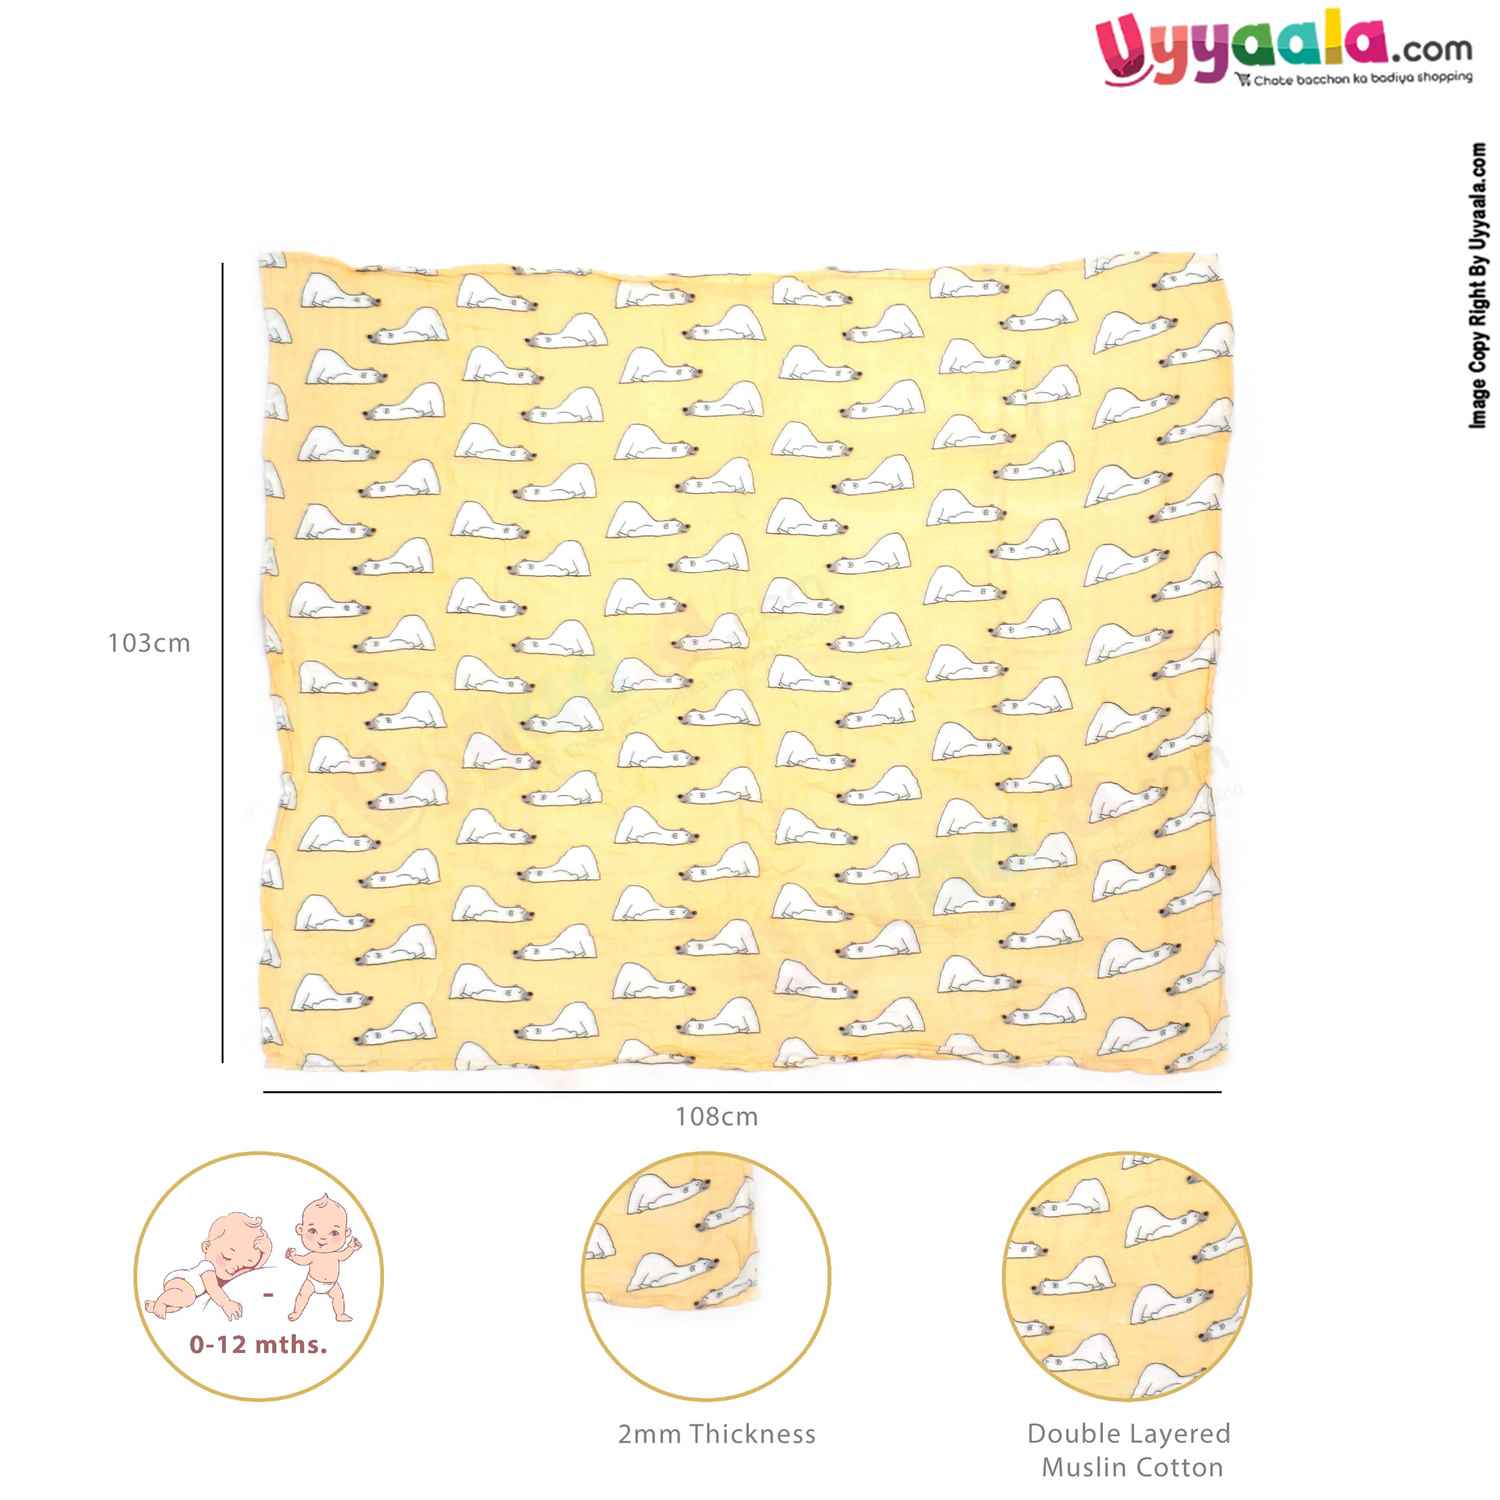 Double Layered Muslin Cotton Wrapper with Bear Print for Babies 0+m Age, Size(108*103cm)- Yellow